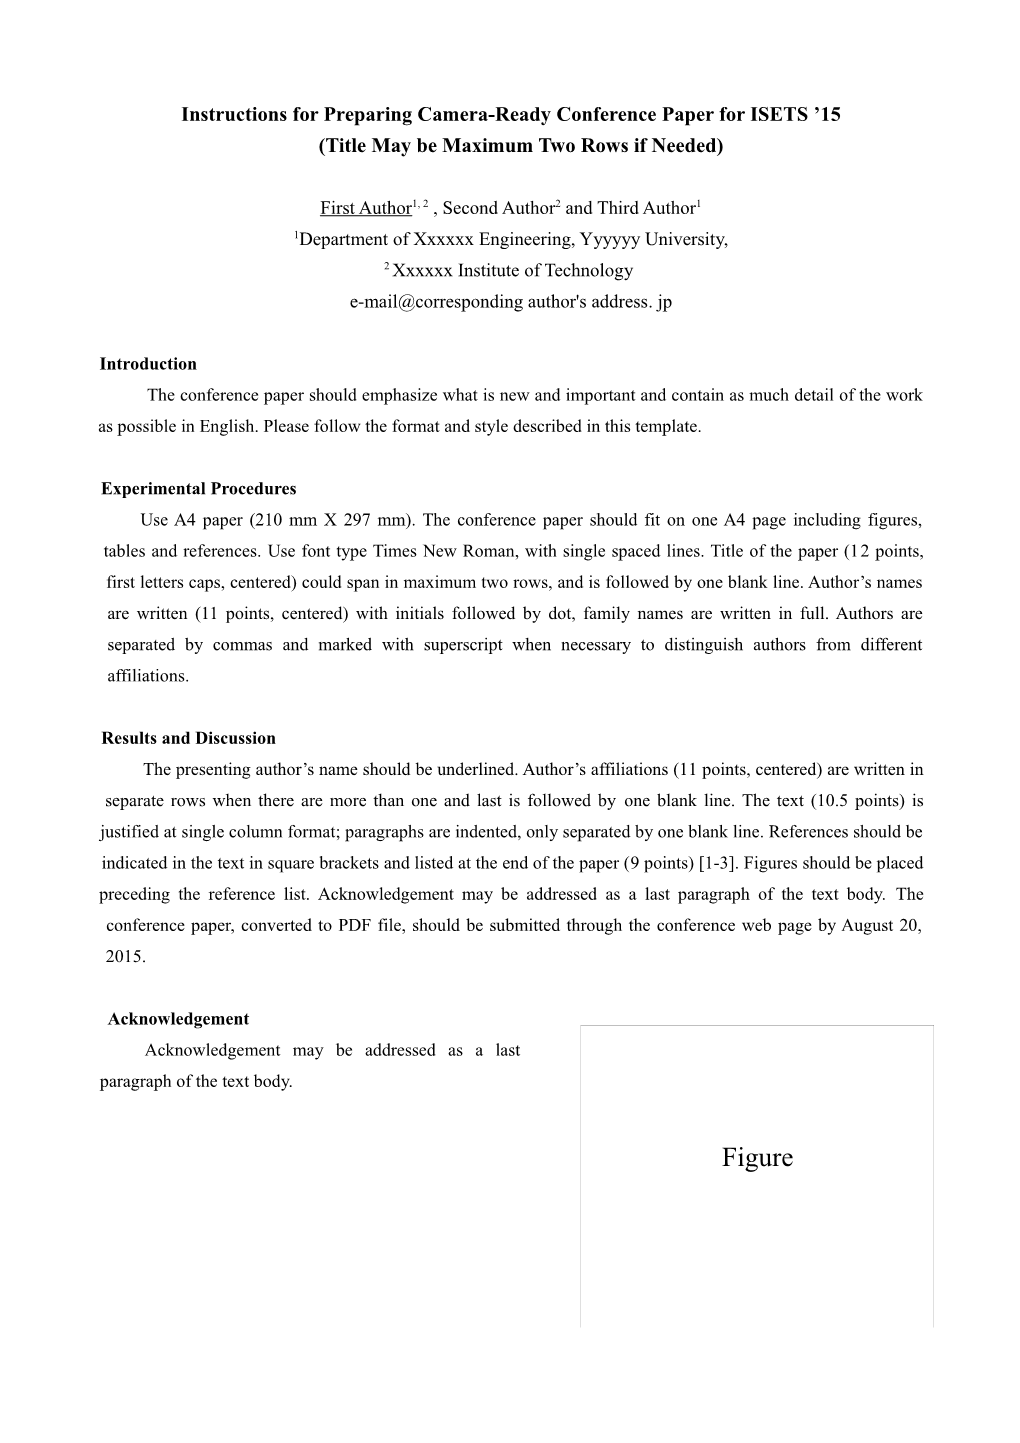 Instructions for Preparing Camera-Ready Conference Paper for ISETS 15